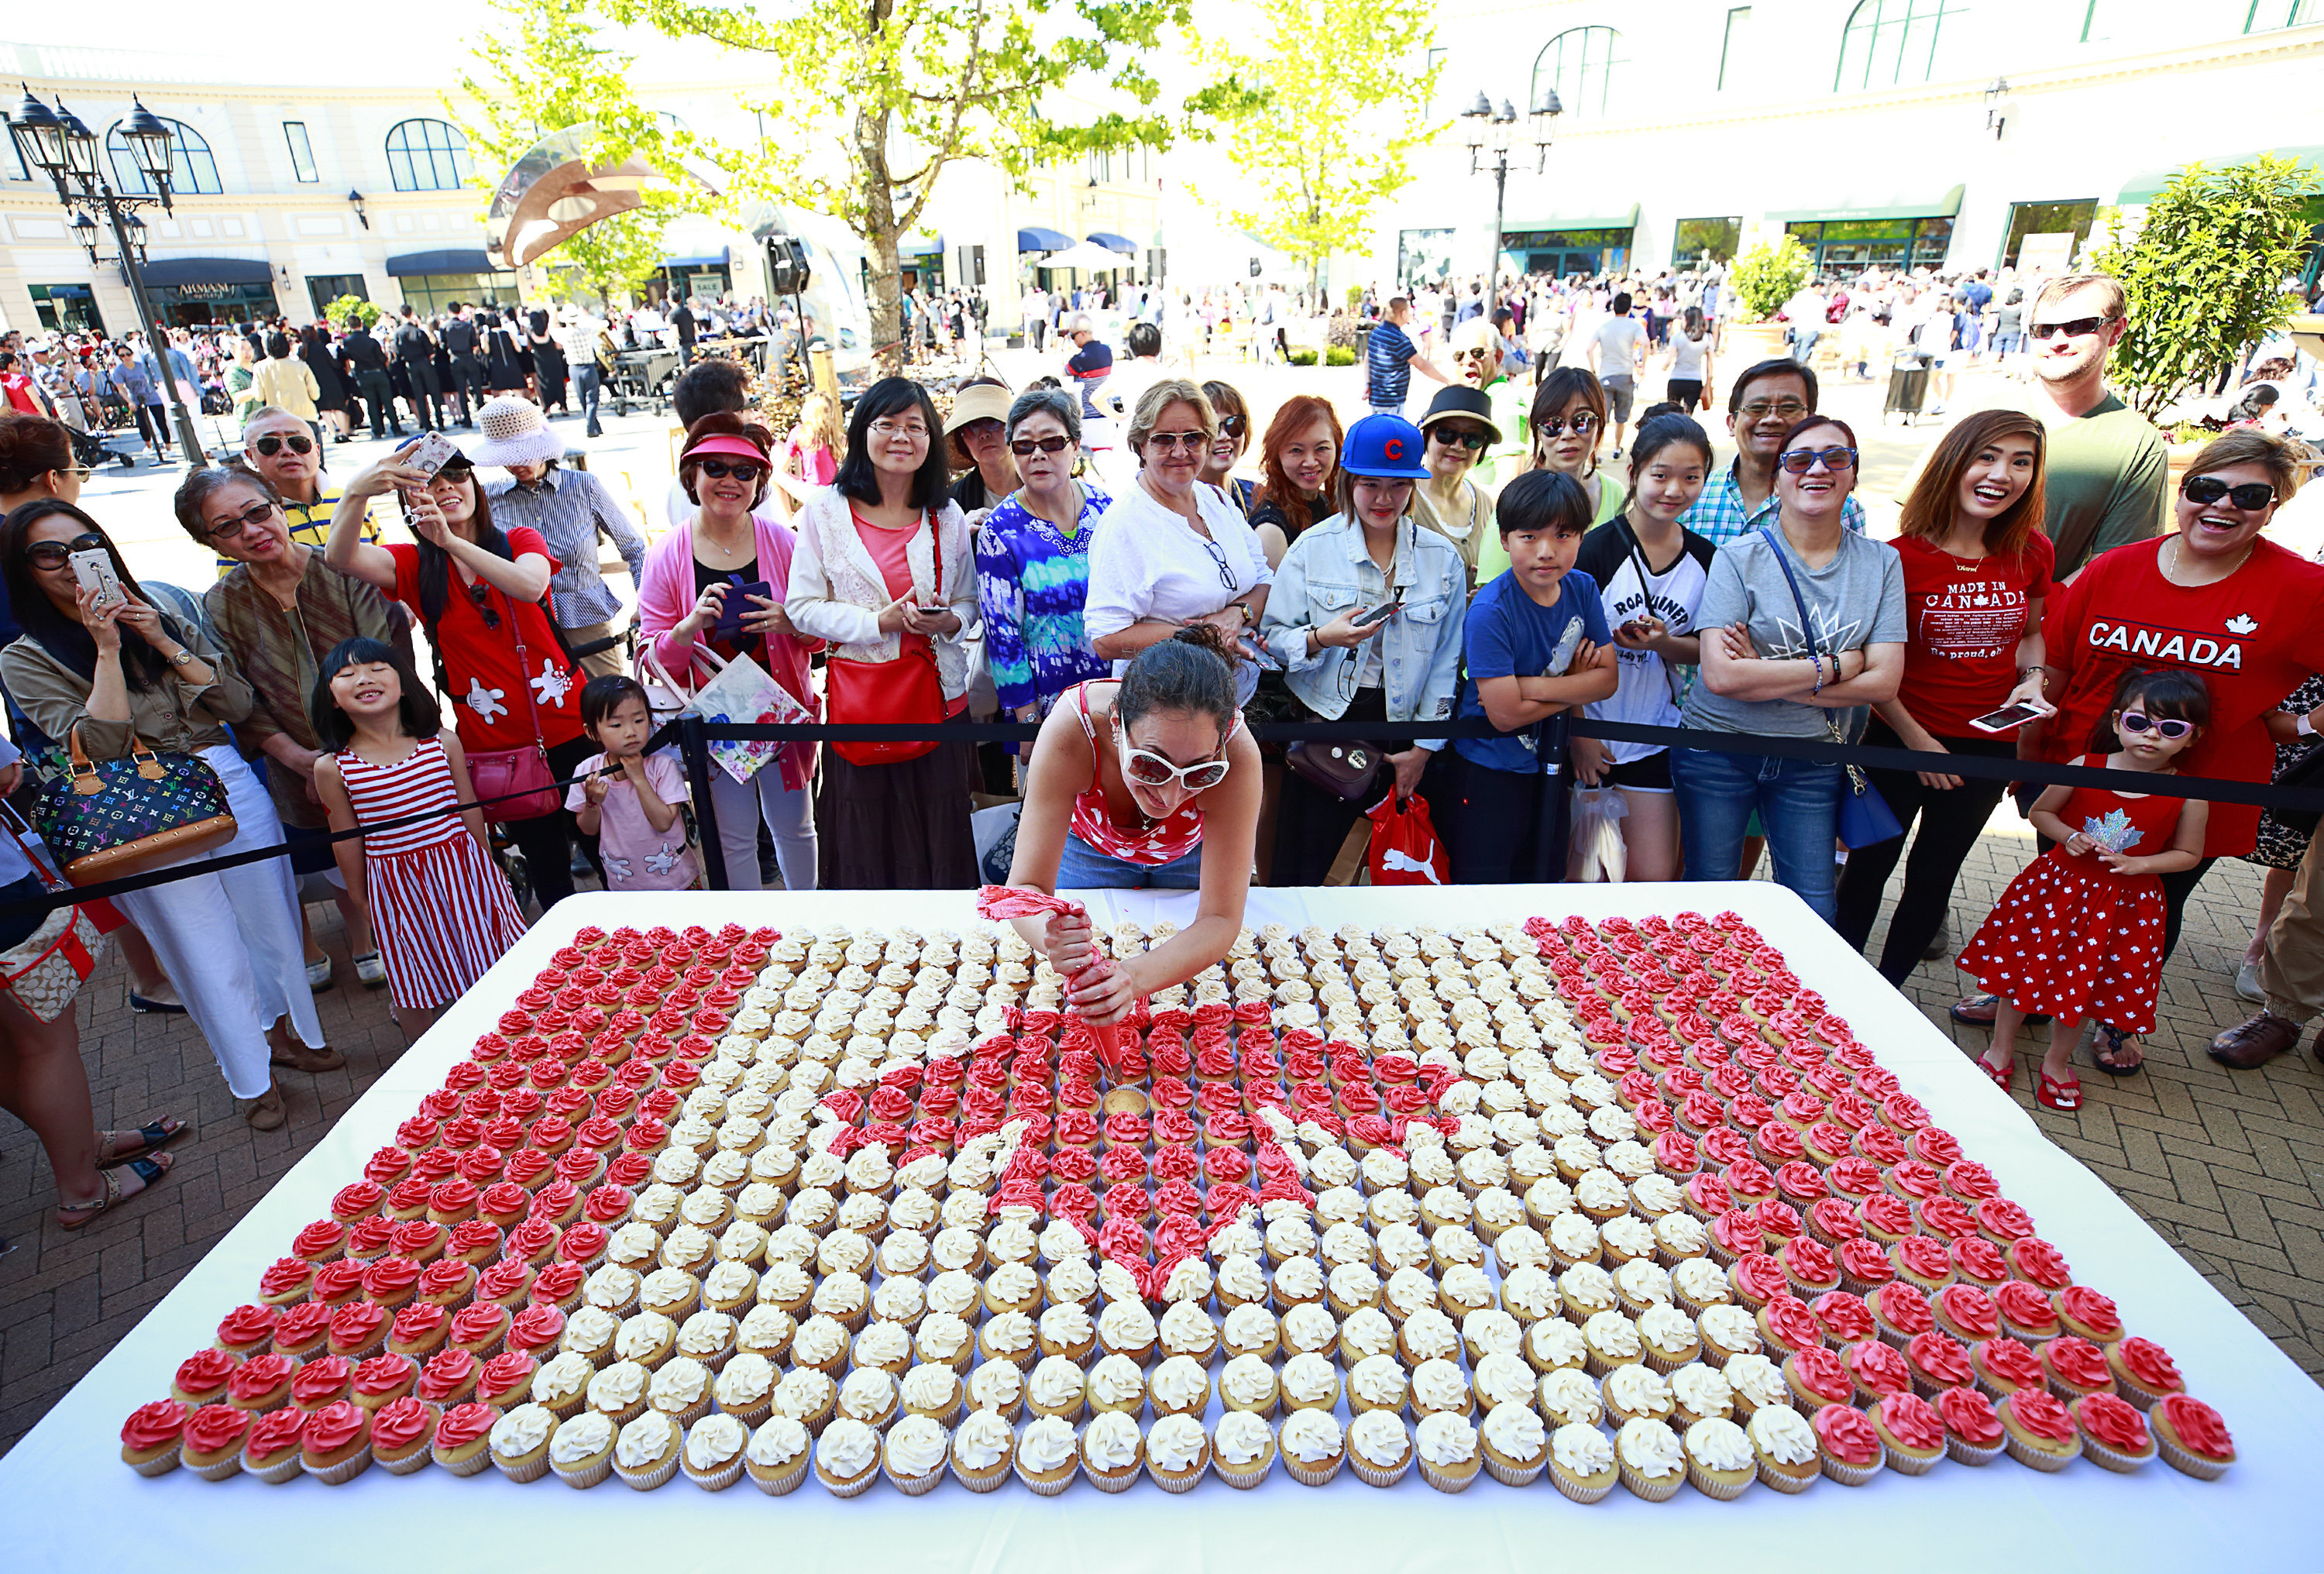 A crowd watches cupcakes being iced in the form of  a Canadian flag during Canada Day celebrations in Richmond, British Columbia, on July 1, 2017. Richmond is the most ethnically Chinese city in the world outside Asia, and home to large numbers of Hong Kong and mainland Chinese immigrants. Photo: AFP 